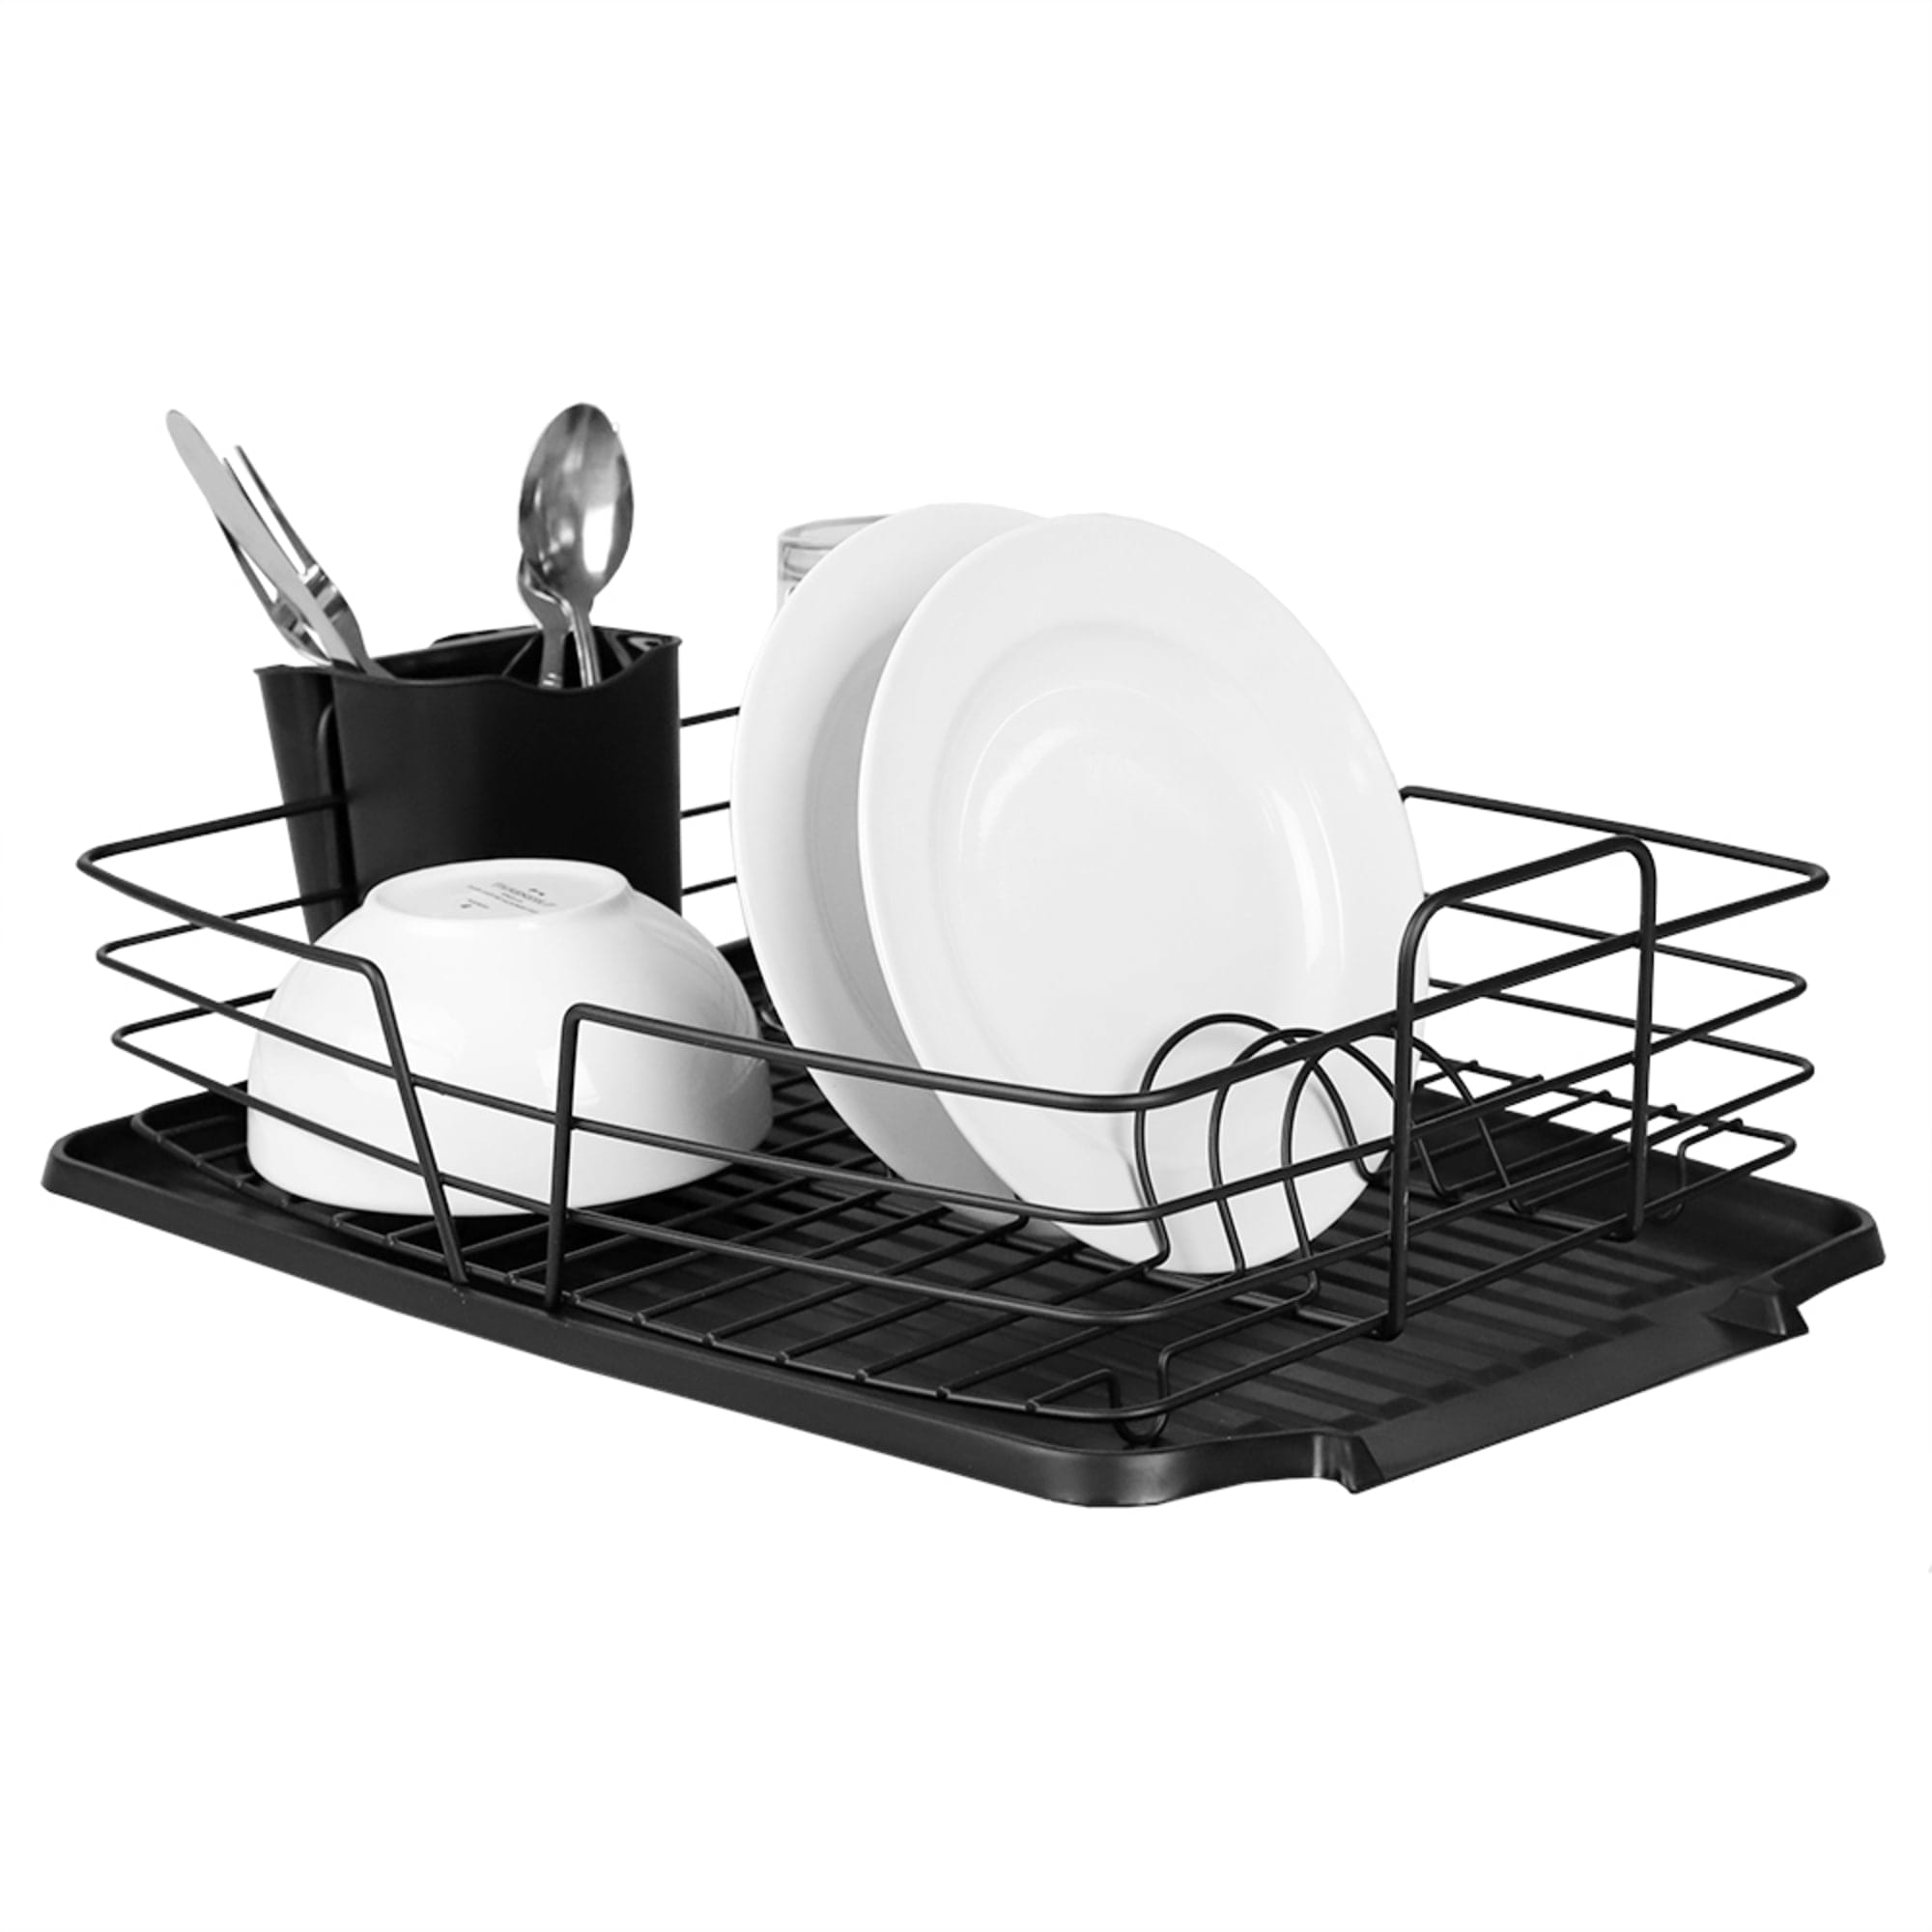 Michael Graves Design Deluxe Dish Rack with Black Finish Wire and Removable Dual Compartment Utensil Holder, Black $14.00 EACH, CASE PACK OF 6